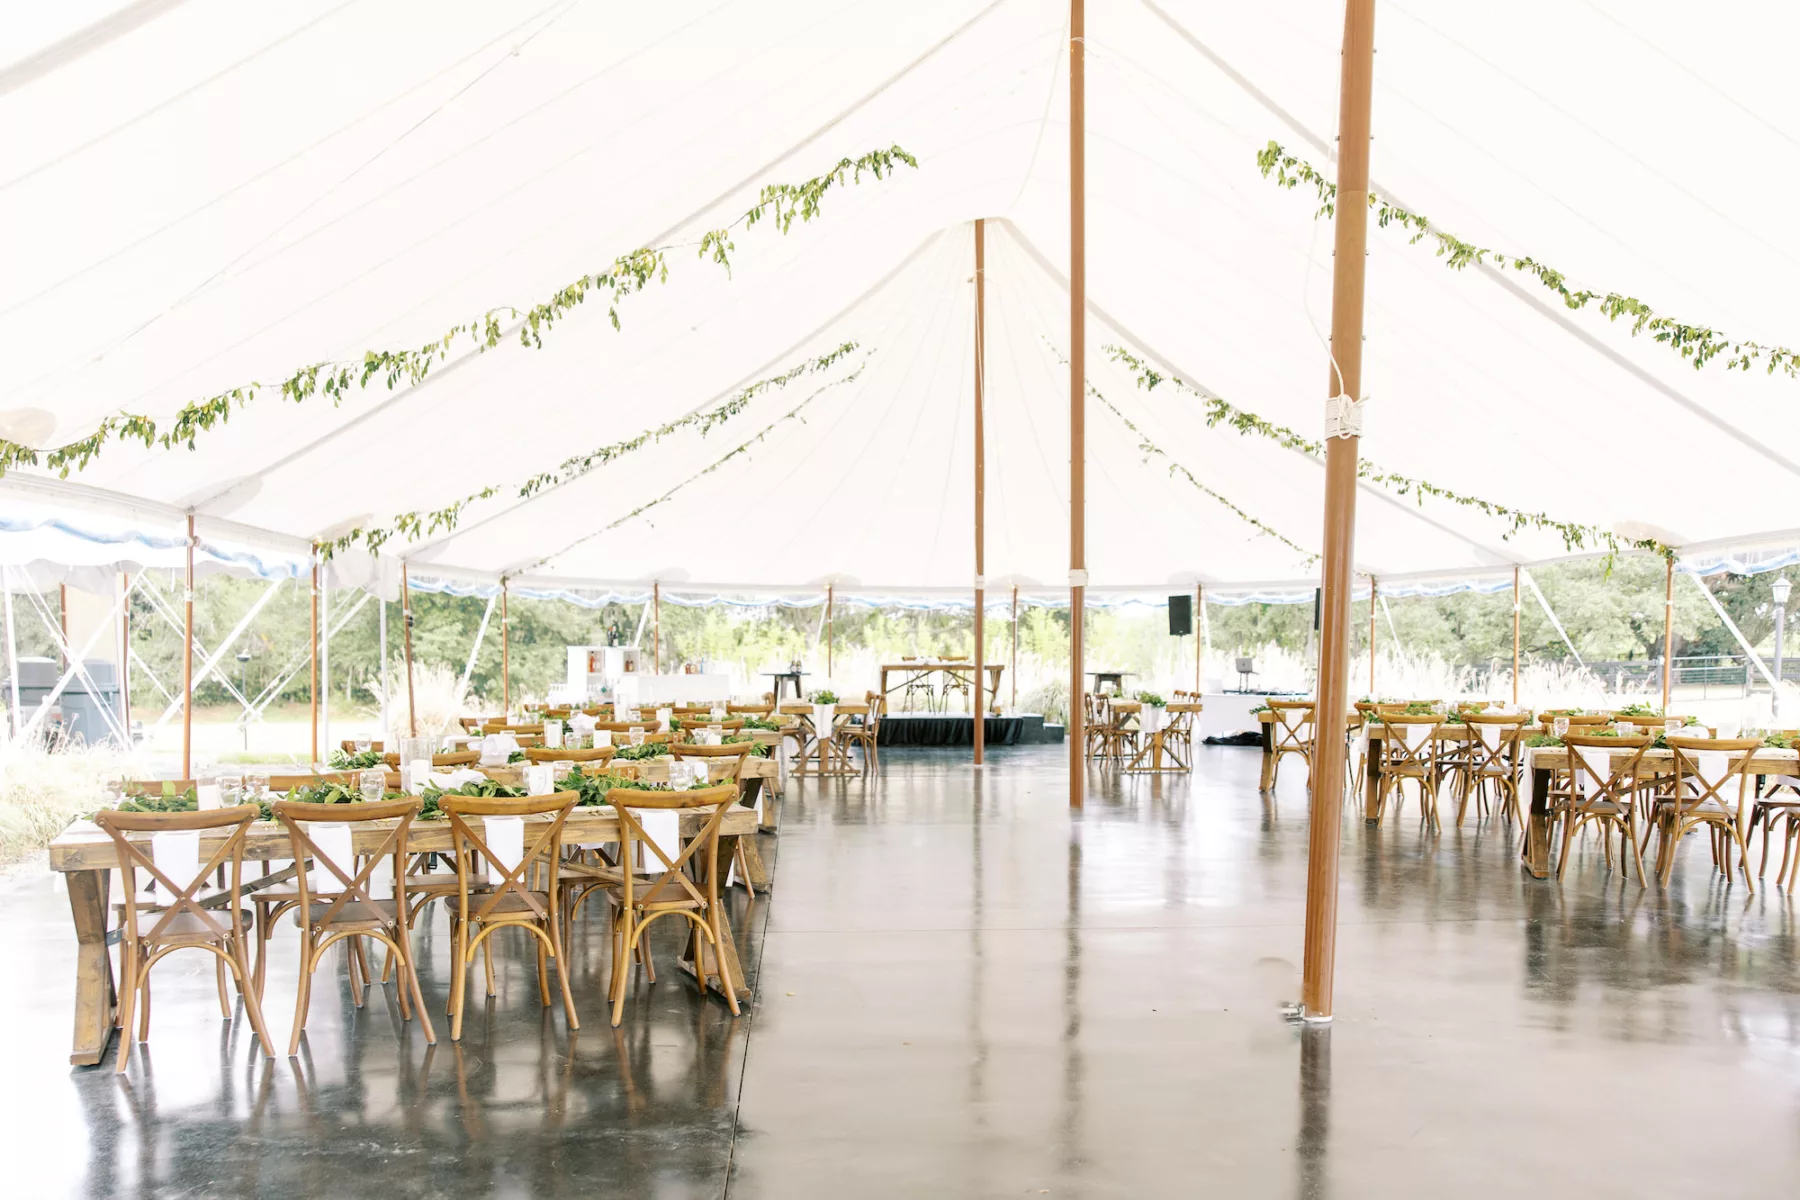 Whimsical Green and White Tented Grand Meadow Wedding Reception Inspiration | Rustic Wooden Tables with Crossback Chairs Ideas | Tampa Bay Event Venue Mill Pond Estate